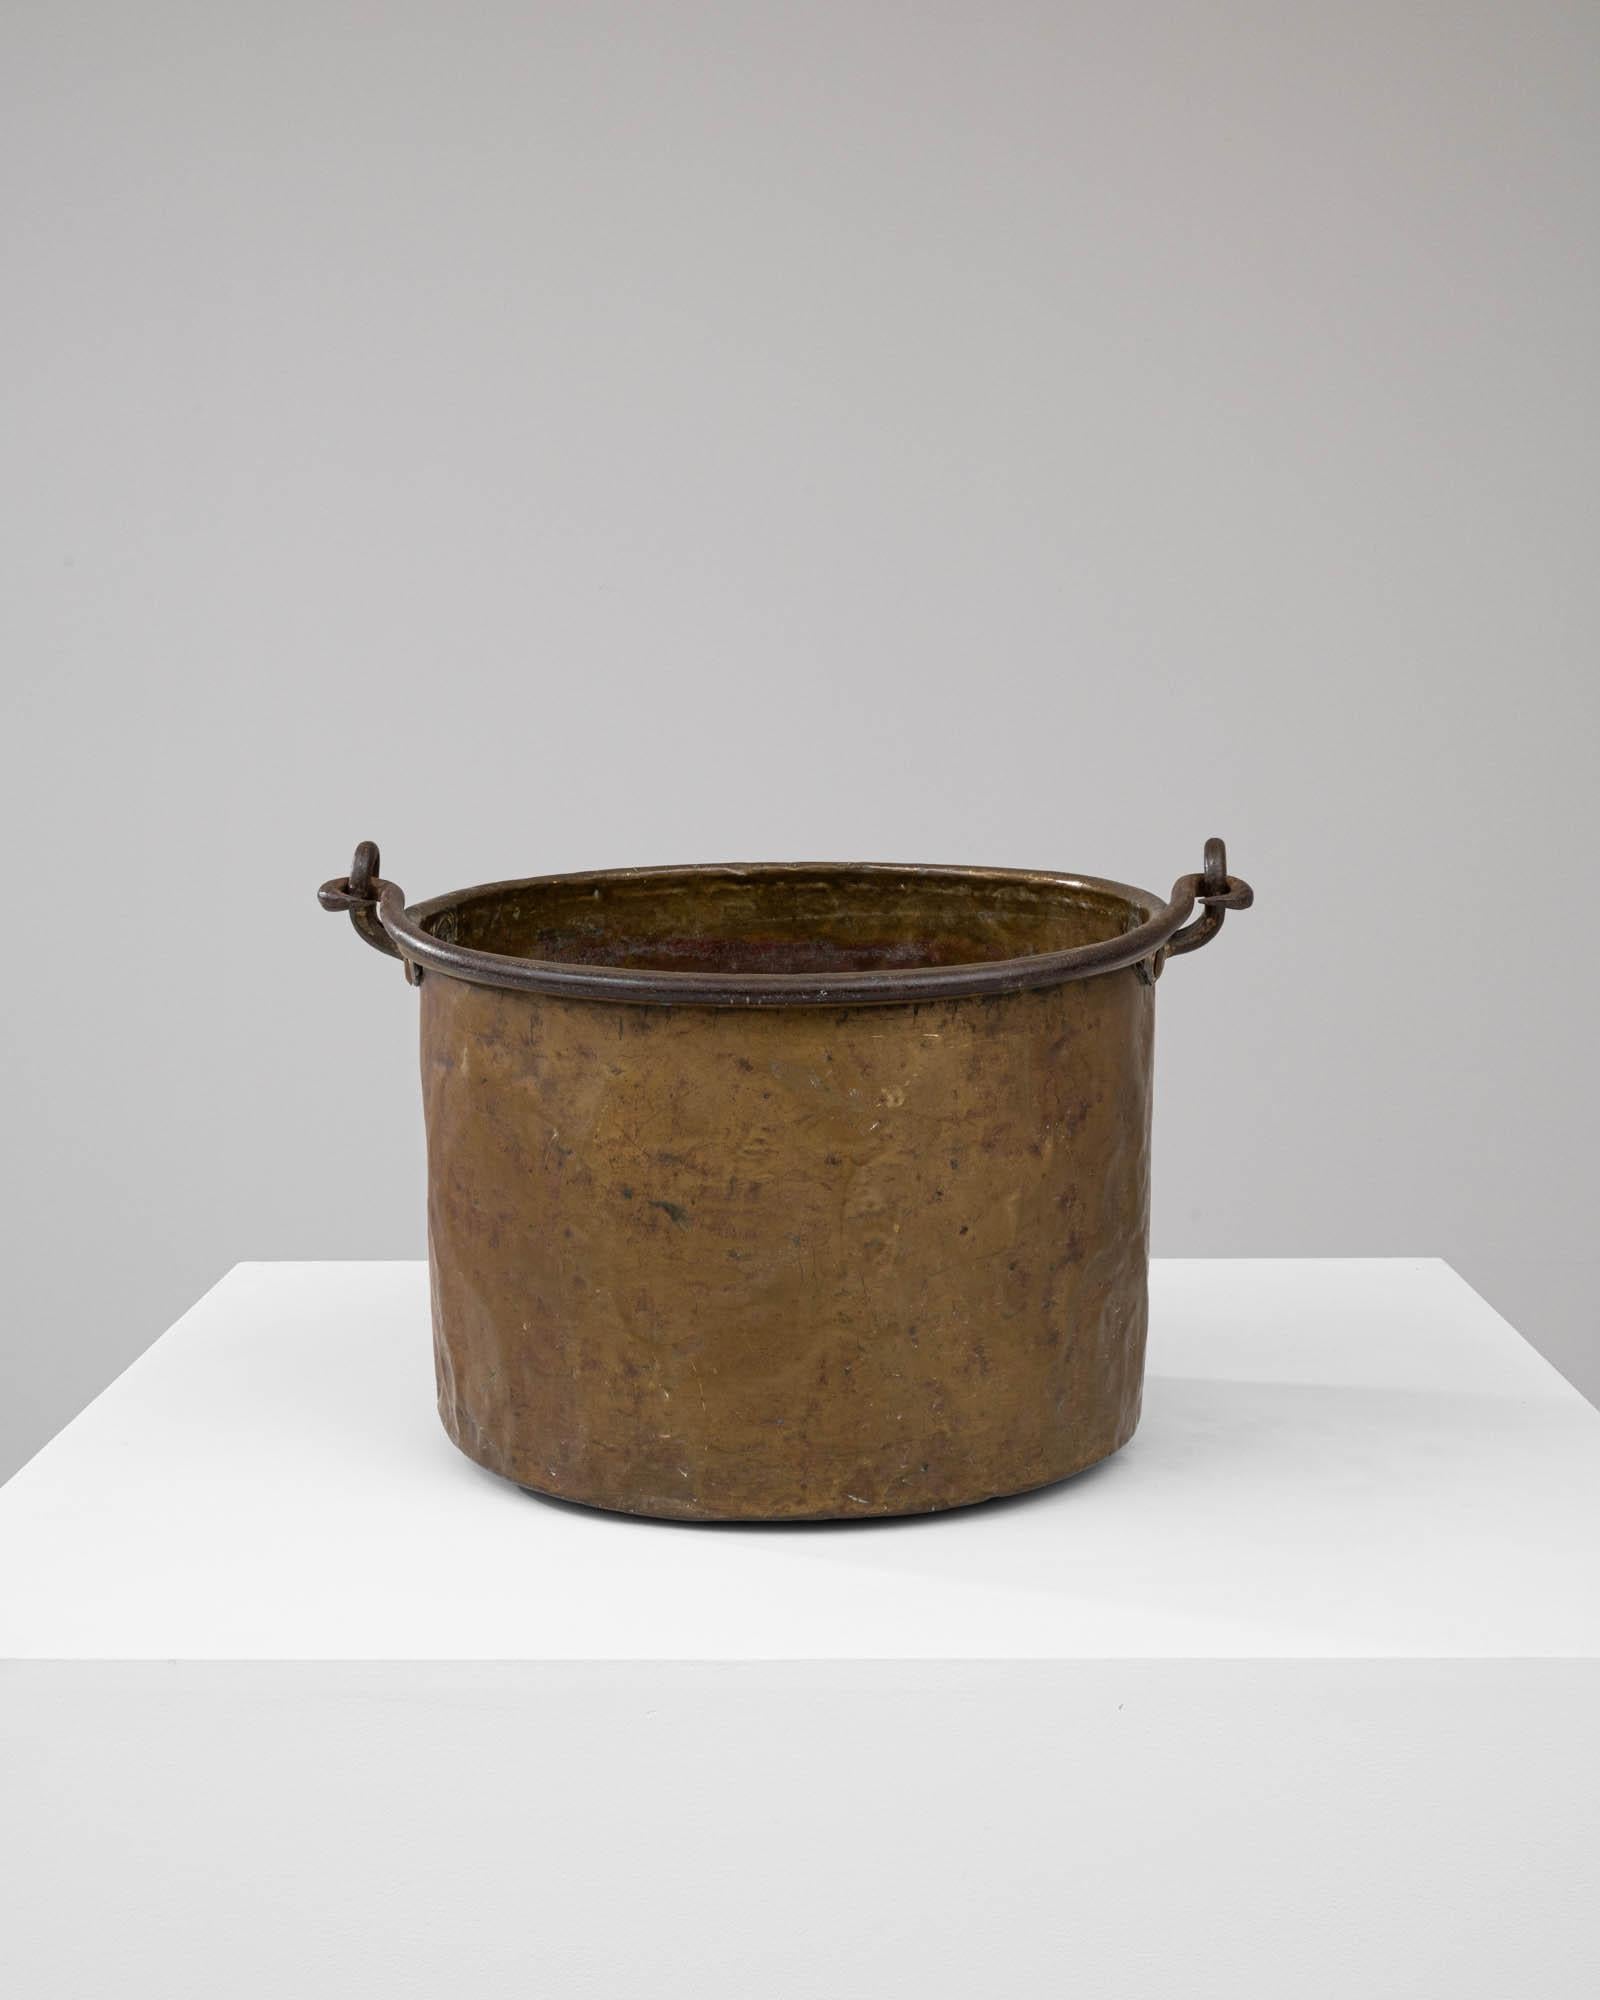 This early 19th Century Brass Bucket is a testament to enduring craftsmanship and utilitarian design. Once a staple in a bygone era, its solid brass construction bears a rich patina that tells tales of its service and longevity. The bucket features